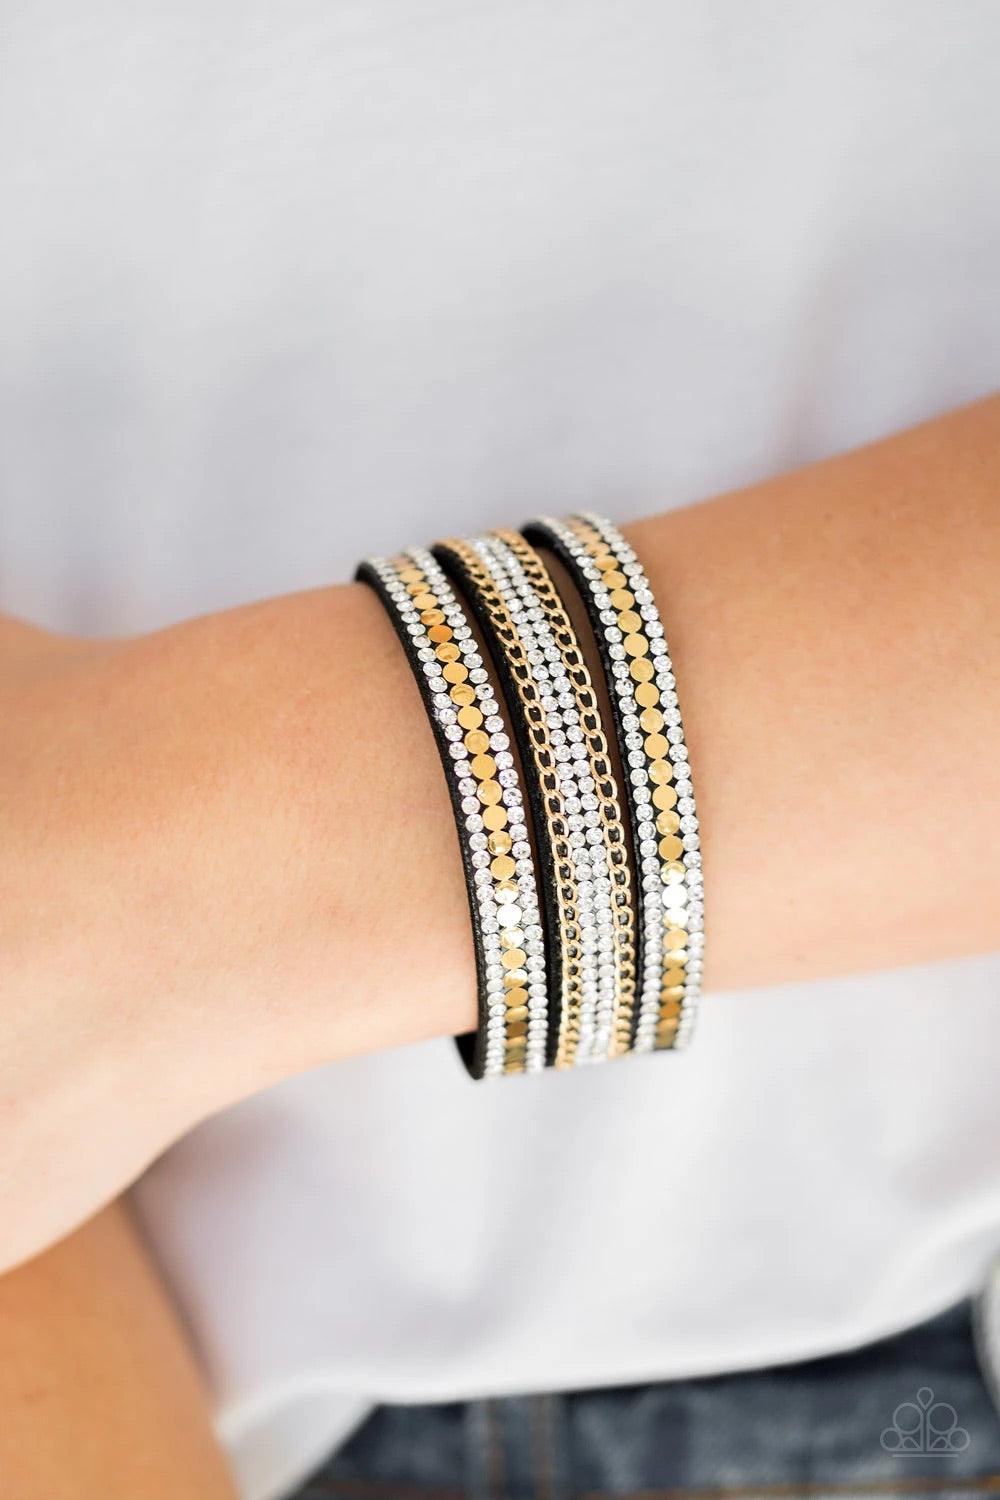 Paparazzi Accessories Fashion Fanatic - Gold Rows of flat gold discs, glassy white rhinestones, and shimmery gold chains are encrusted along black suede bands for a sassy look. Features an adjustable snap closure. Sold as one individual bracelet. Jewelry